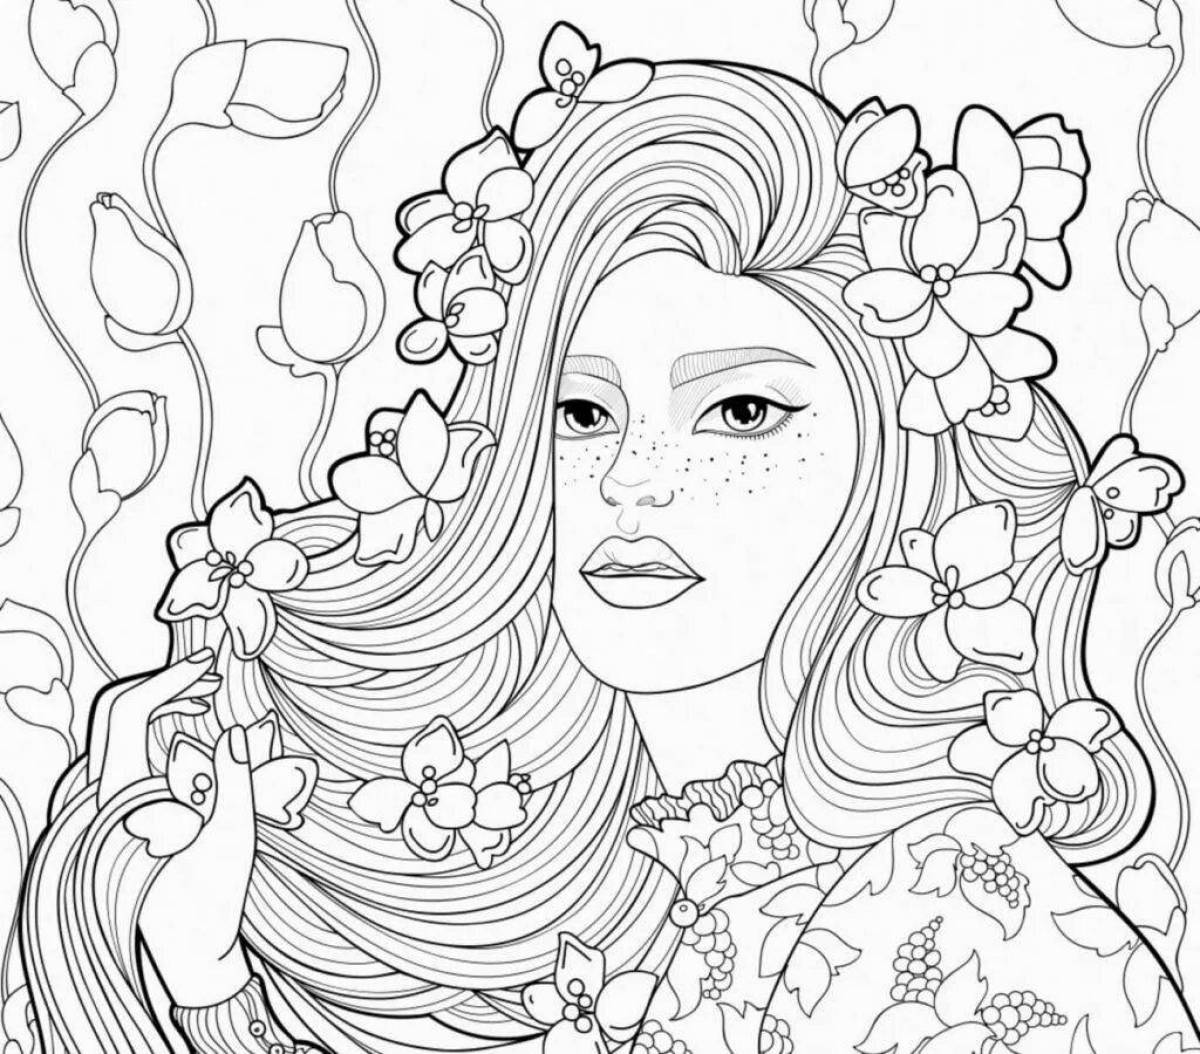 Exquisite coloring book for girls 9-10 years old